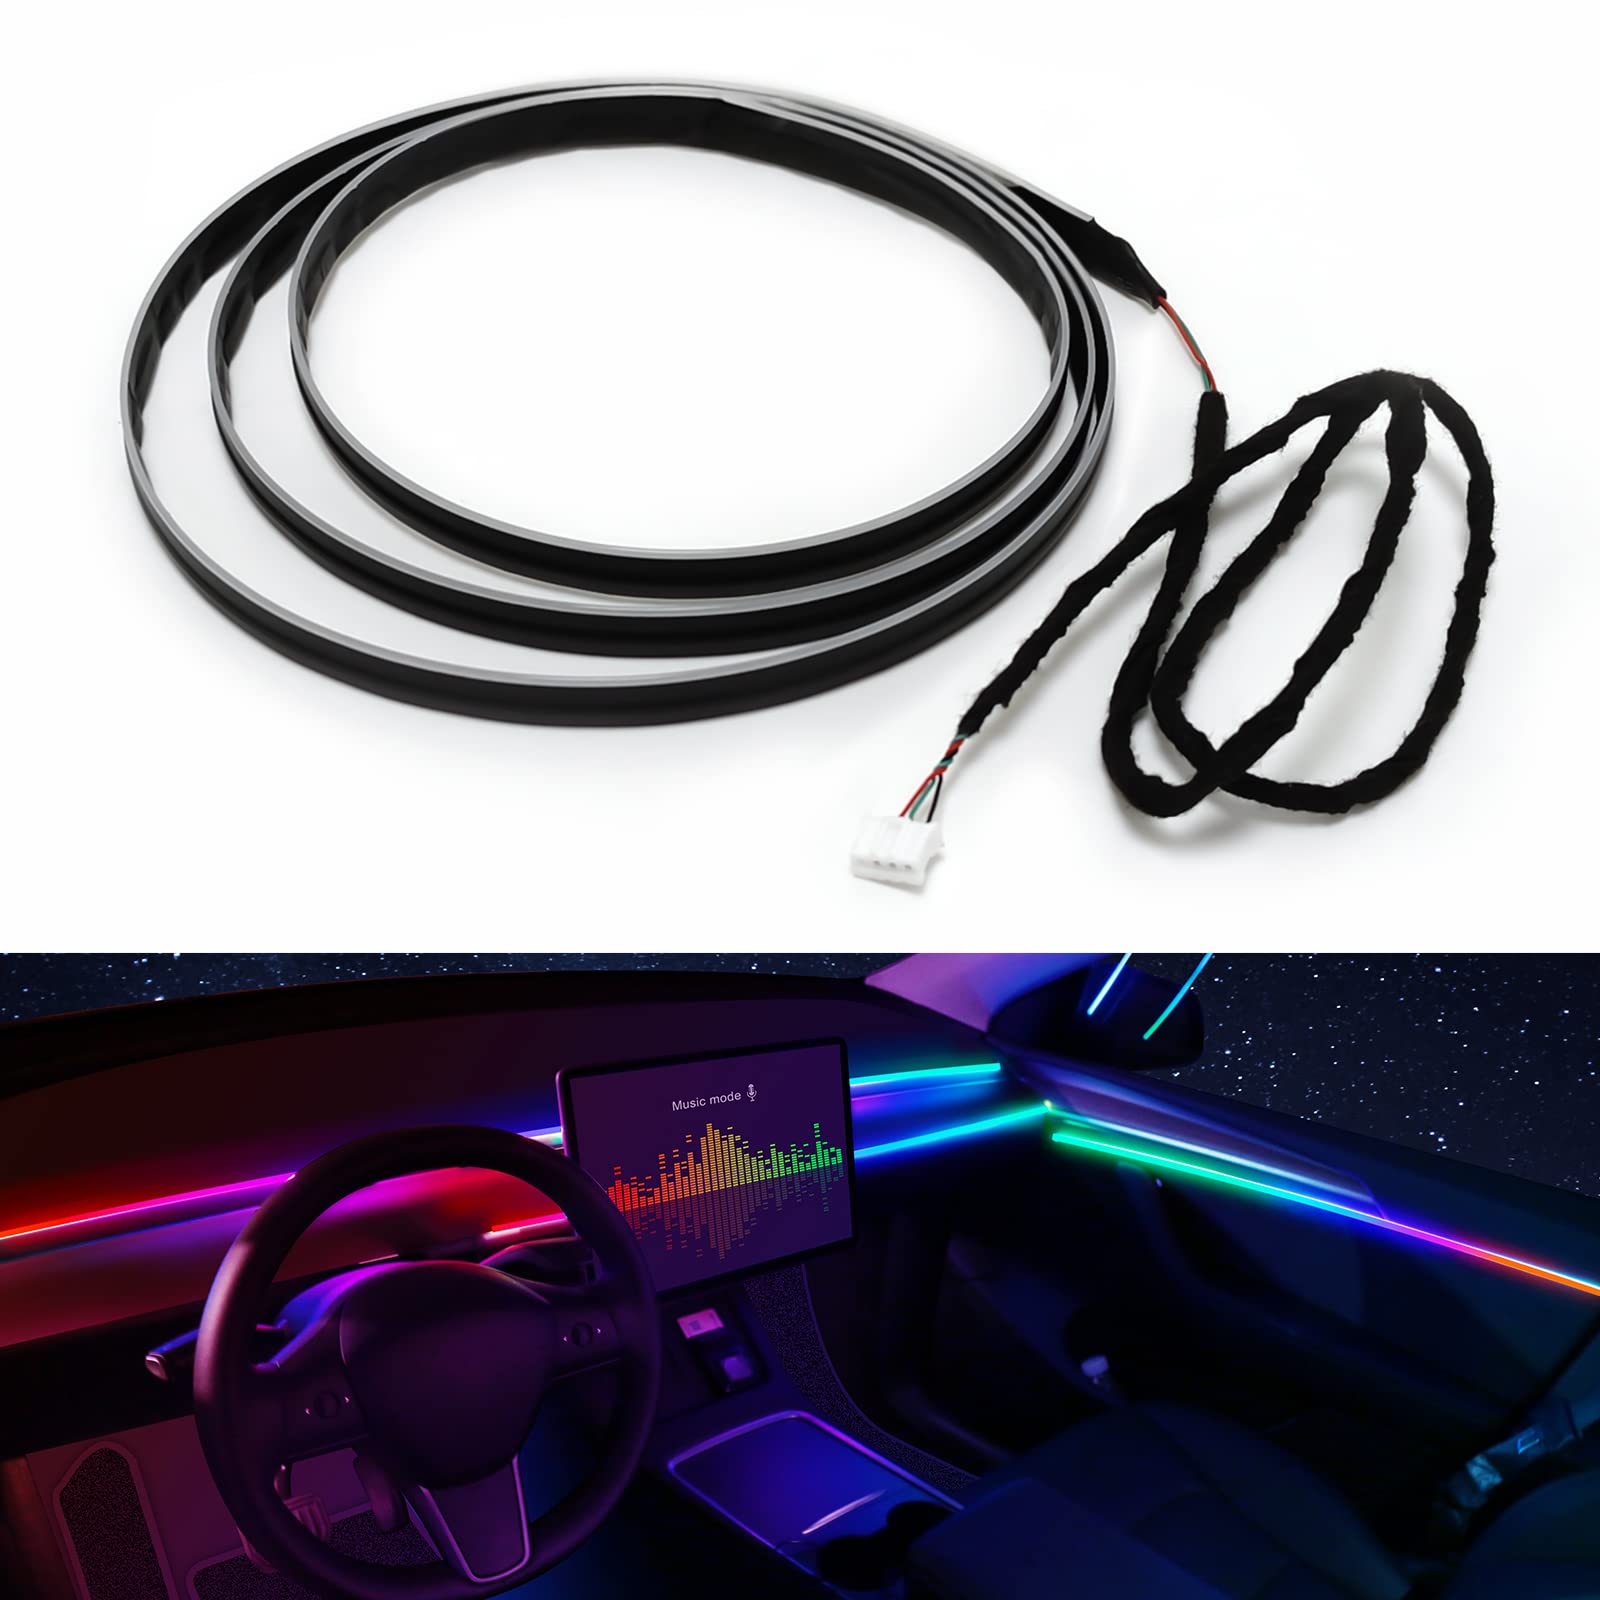 Dreamcolor Acrylic Interior Car LED Strip Light 55.1-inch, which fit for dreamcolor main controller connects and sub-controller kit (not including), Not applicable dreamcolor 5 in 1(single controller) von TWETIZ